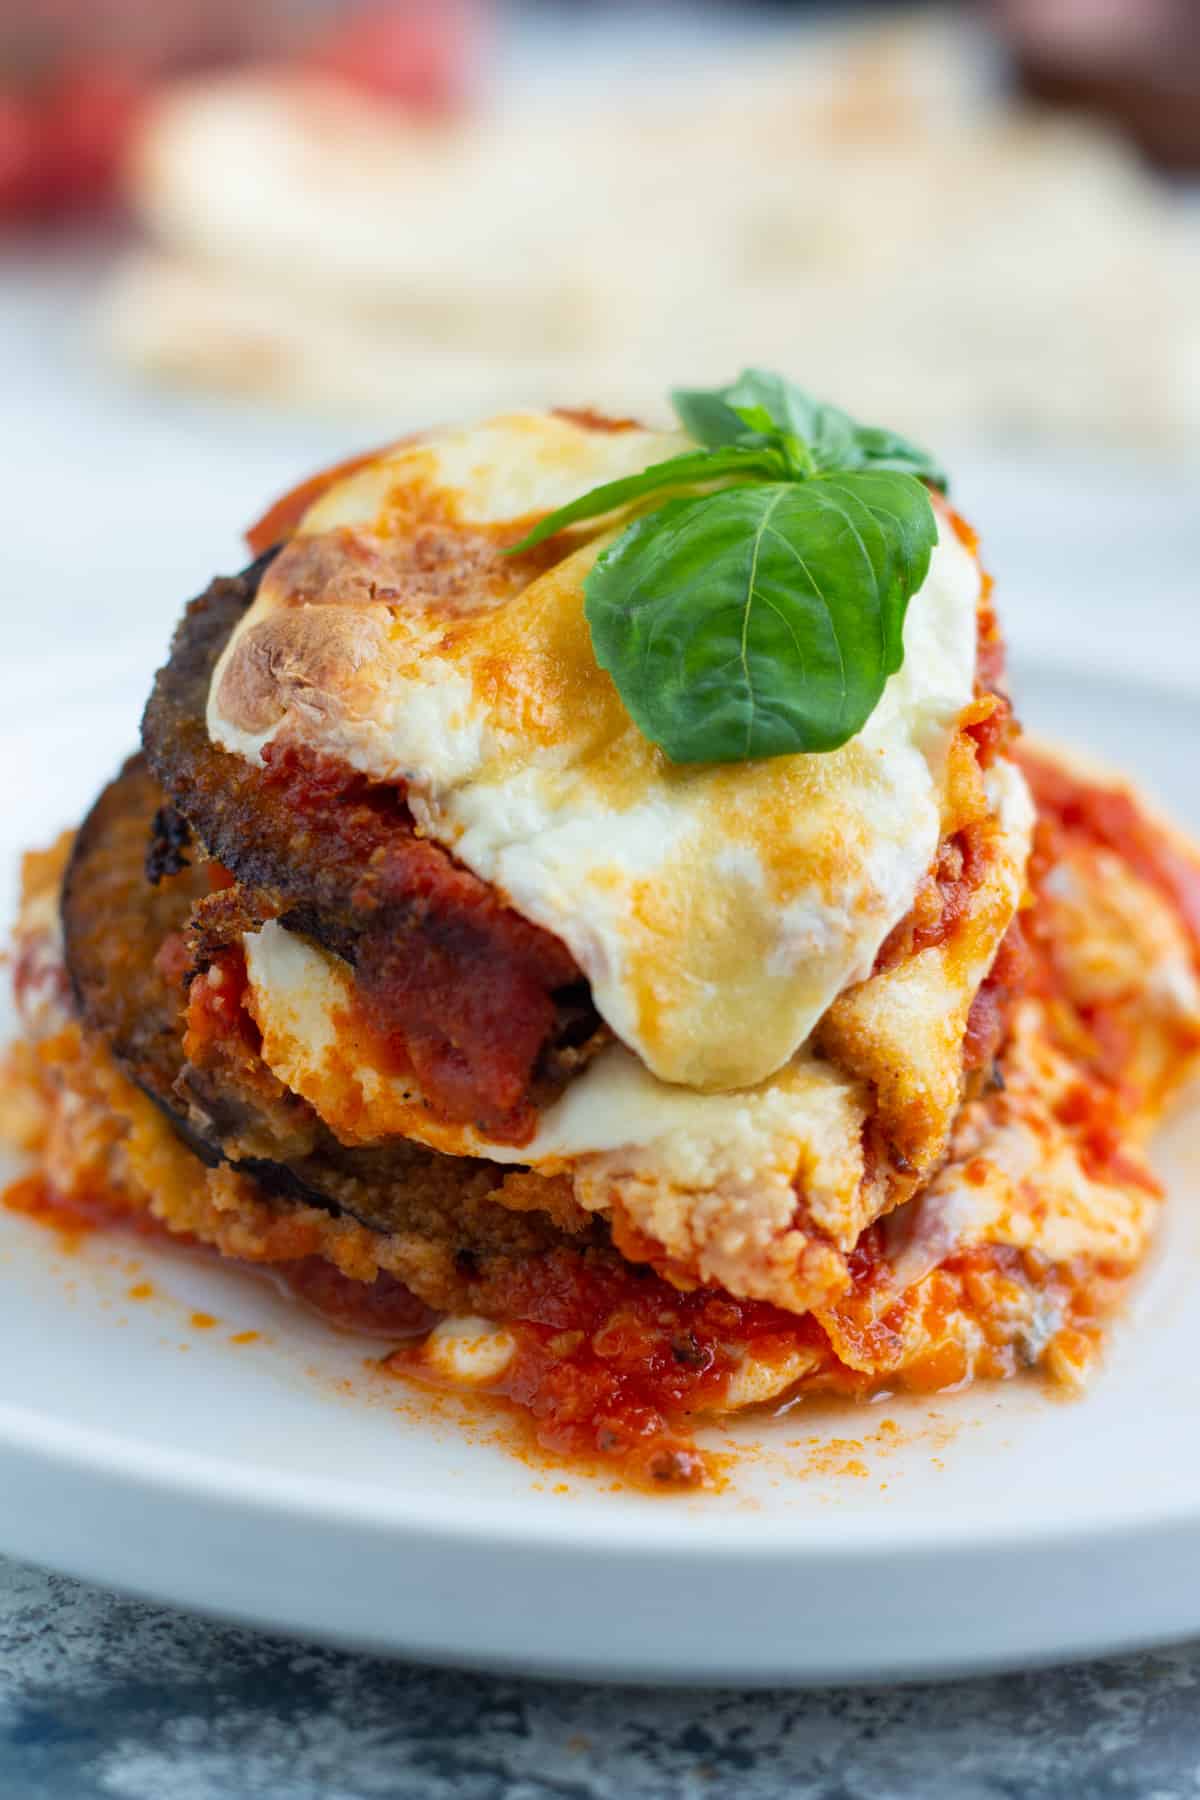 This eggplant parmesan recipe is a classic for good reasons. You can't go wrong with layers of eggplant, cheese and marinara sauce. Learn how to make this eggplant casserole with this easy tutorial (including a special tip that makes this dish special!) and how-to video. 
